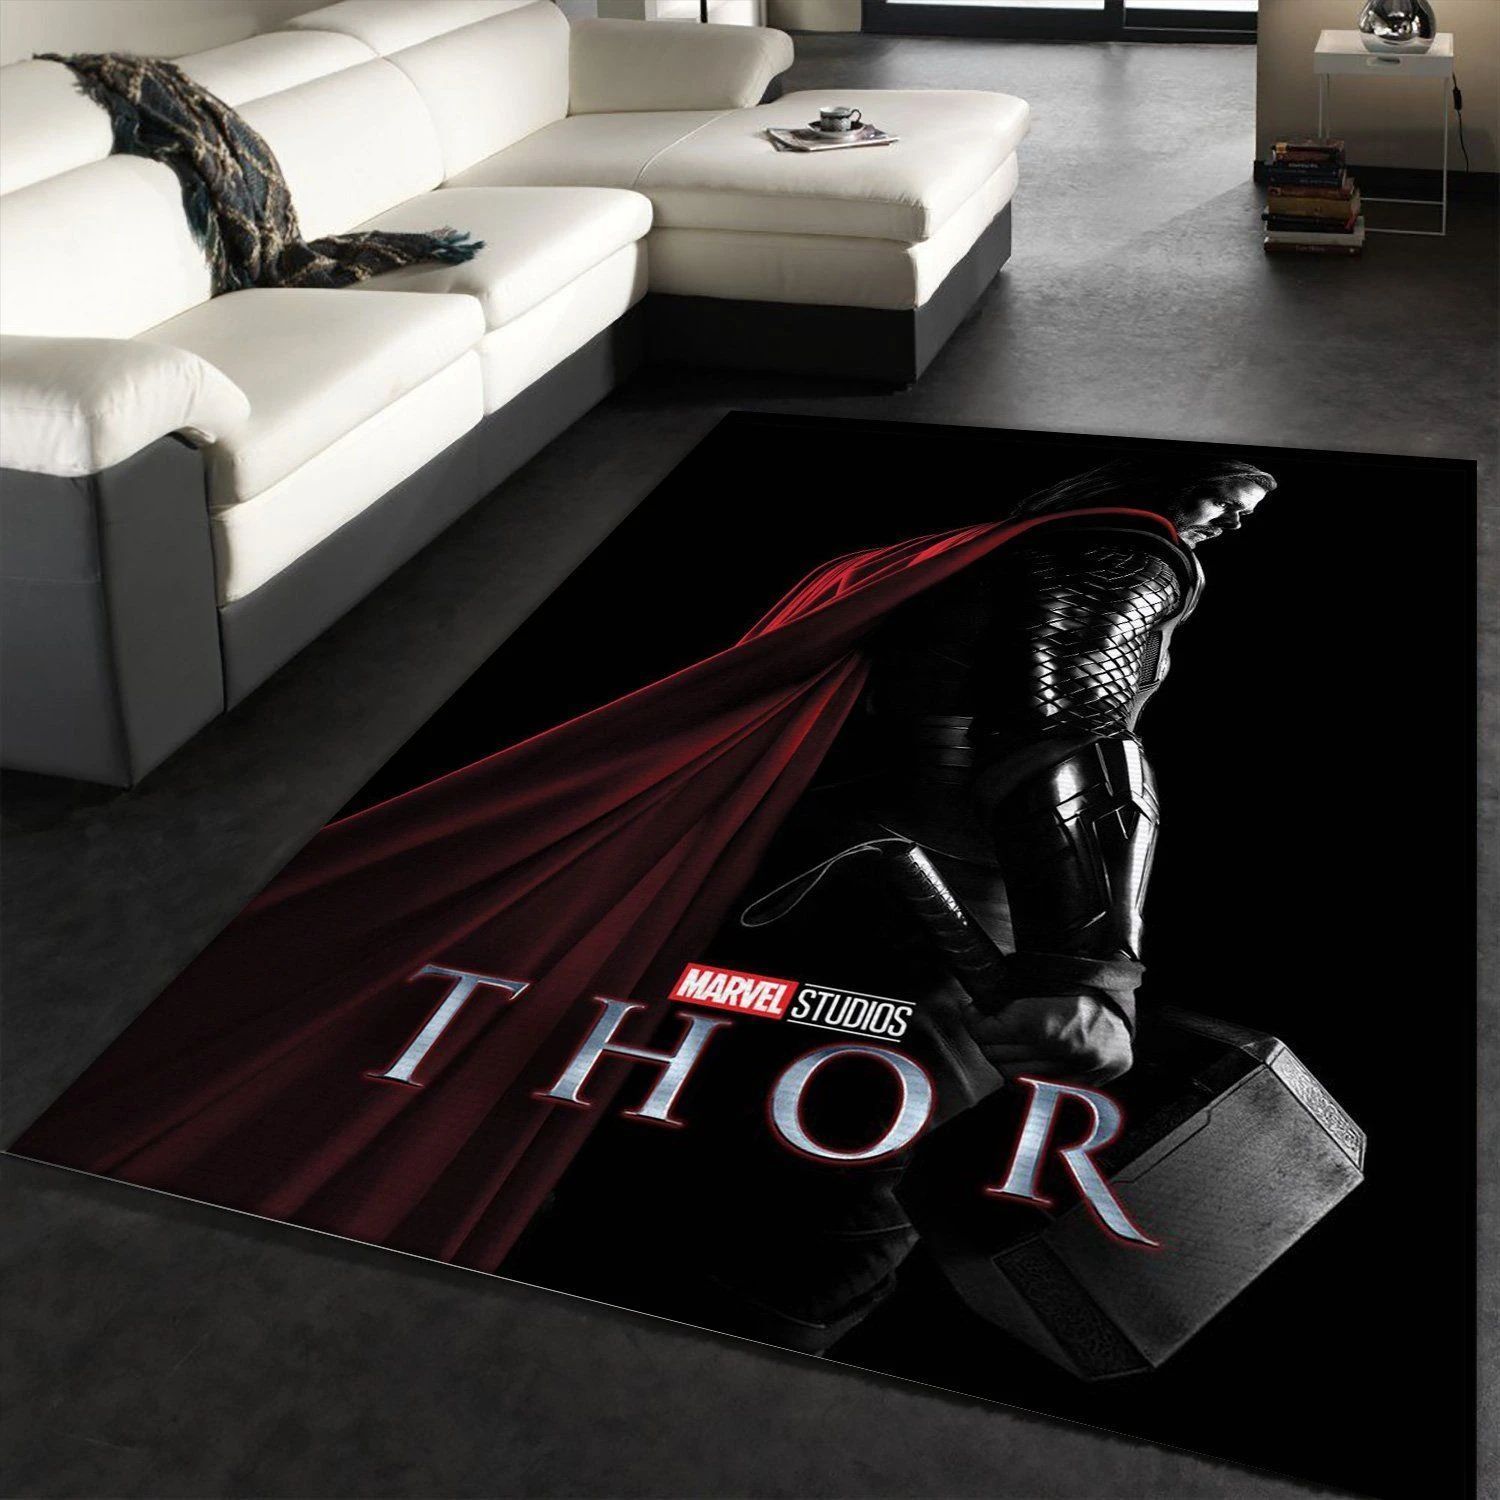 Thor Movie Area Rug Carpet, Living room and bedroom Rug, US Gift Decor - Indoor Outdoor Rugs